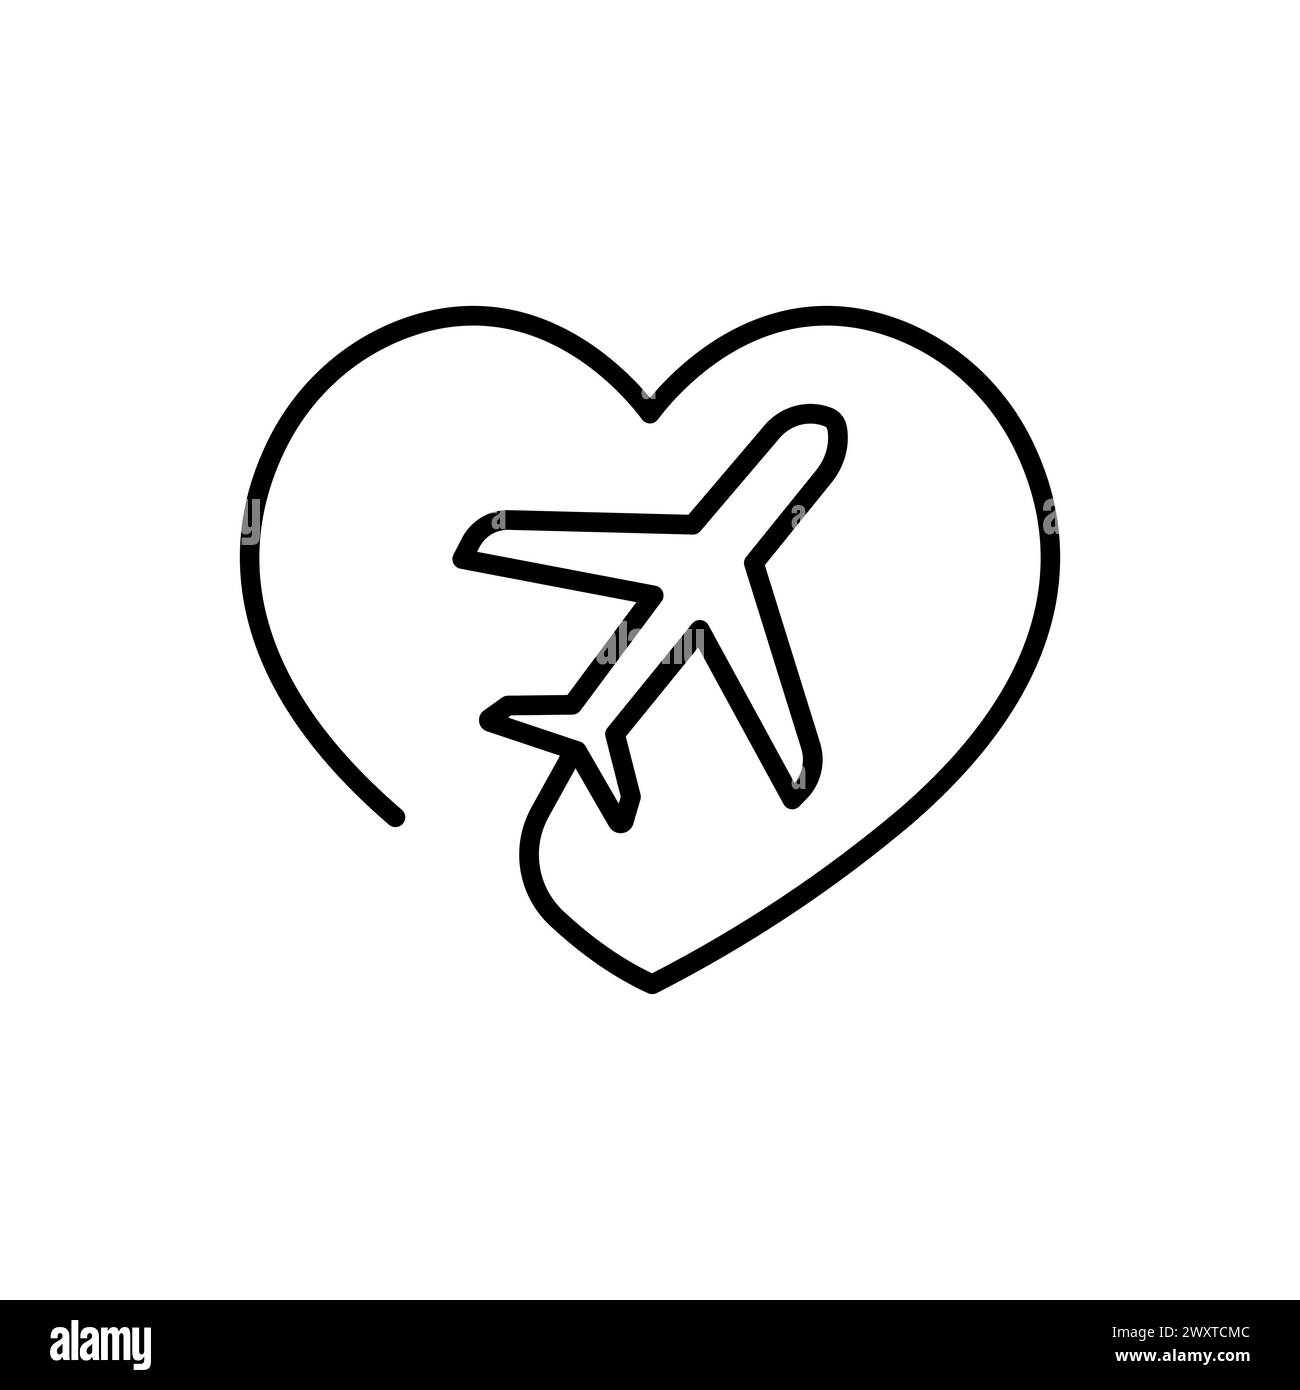 Airplane and heart vector image on white background. Traveling by plane. Love to travel graphic picture. Linear image of an airplane. Stock Vector